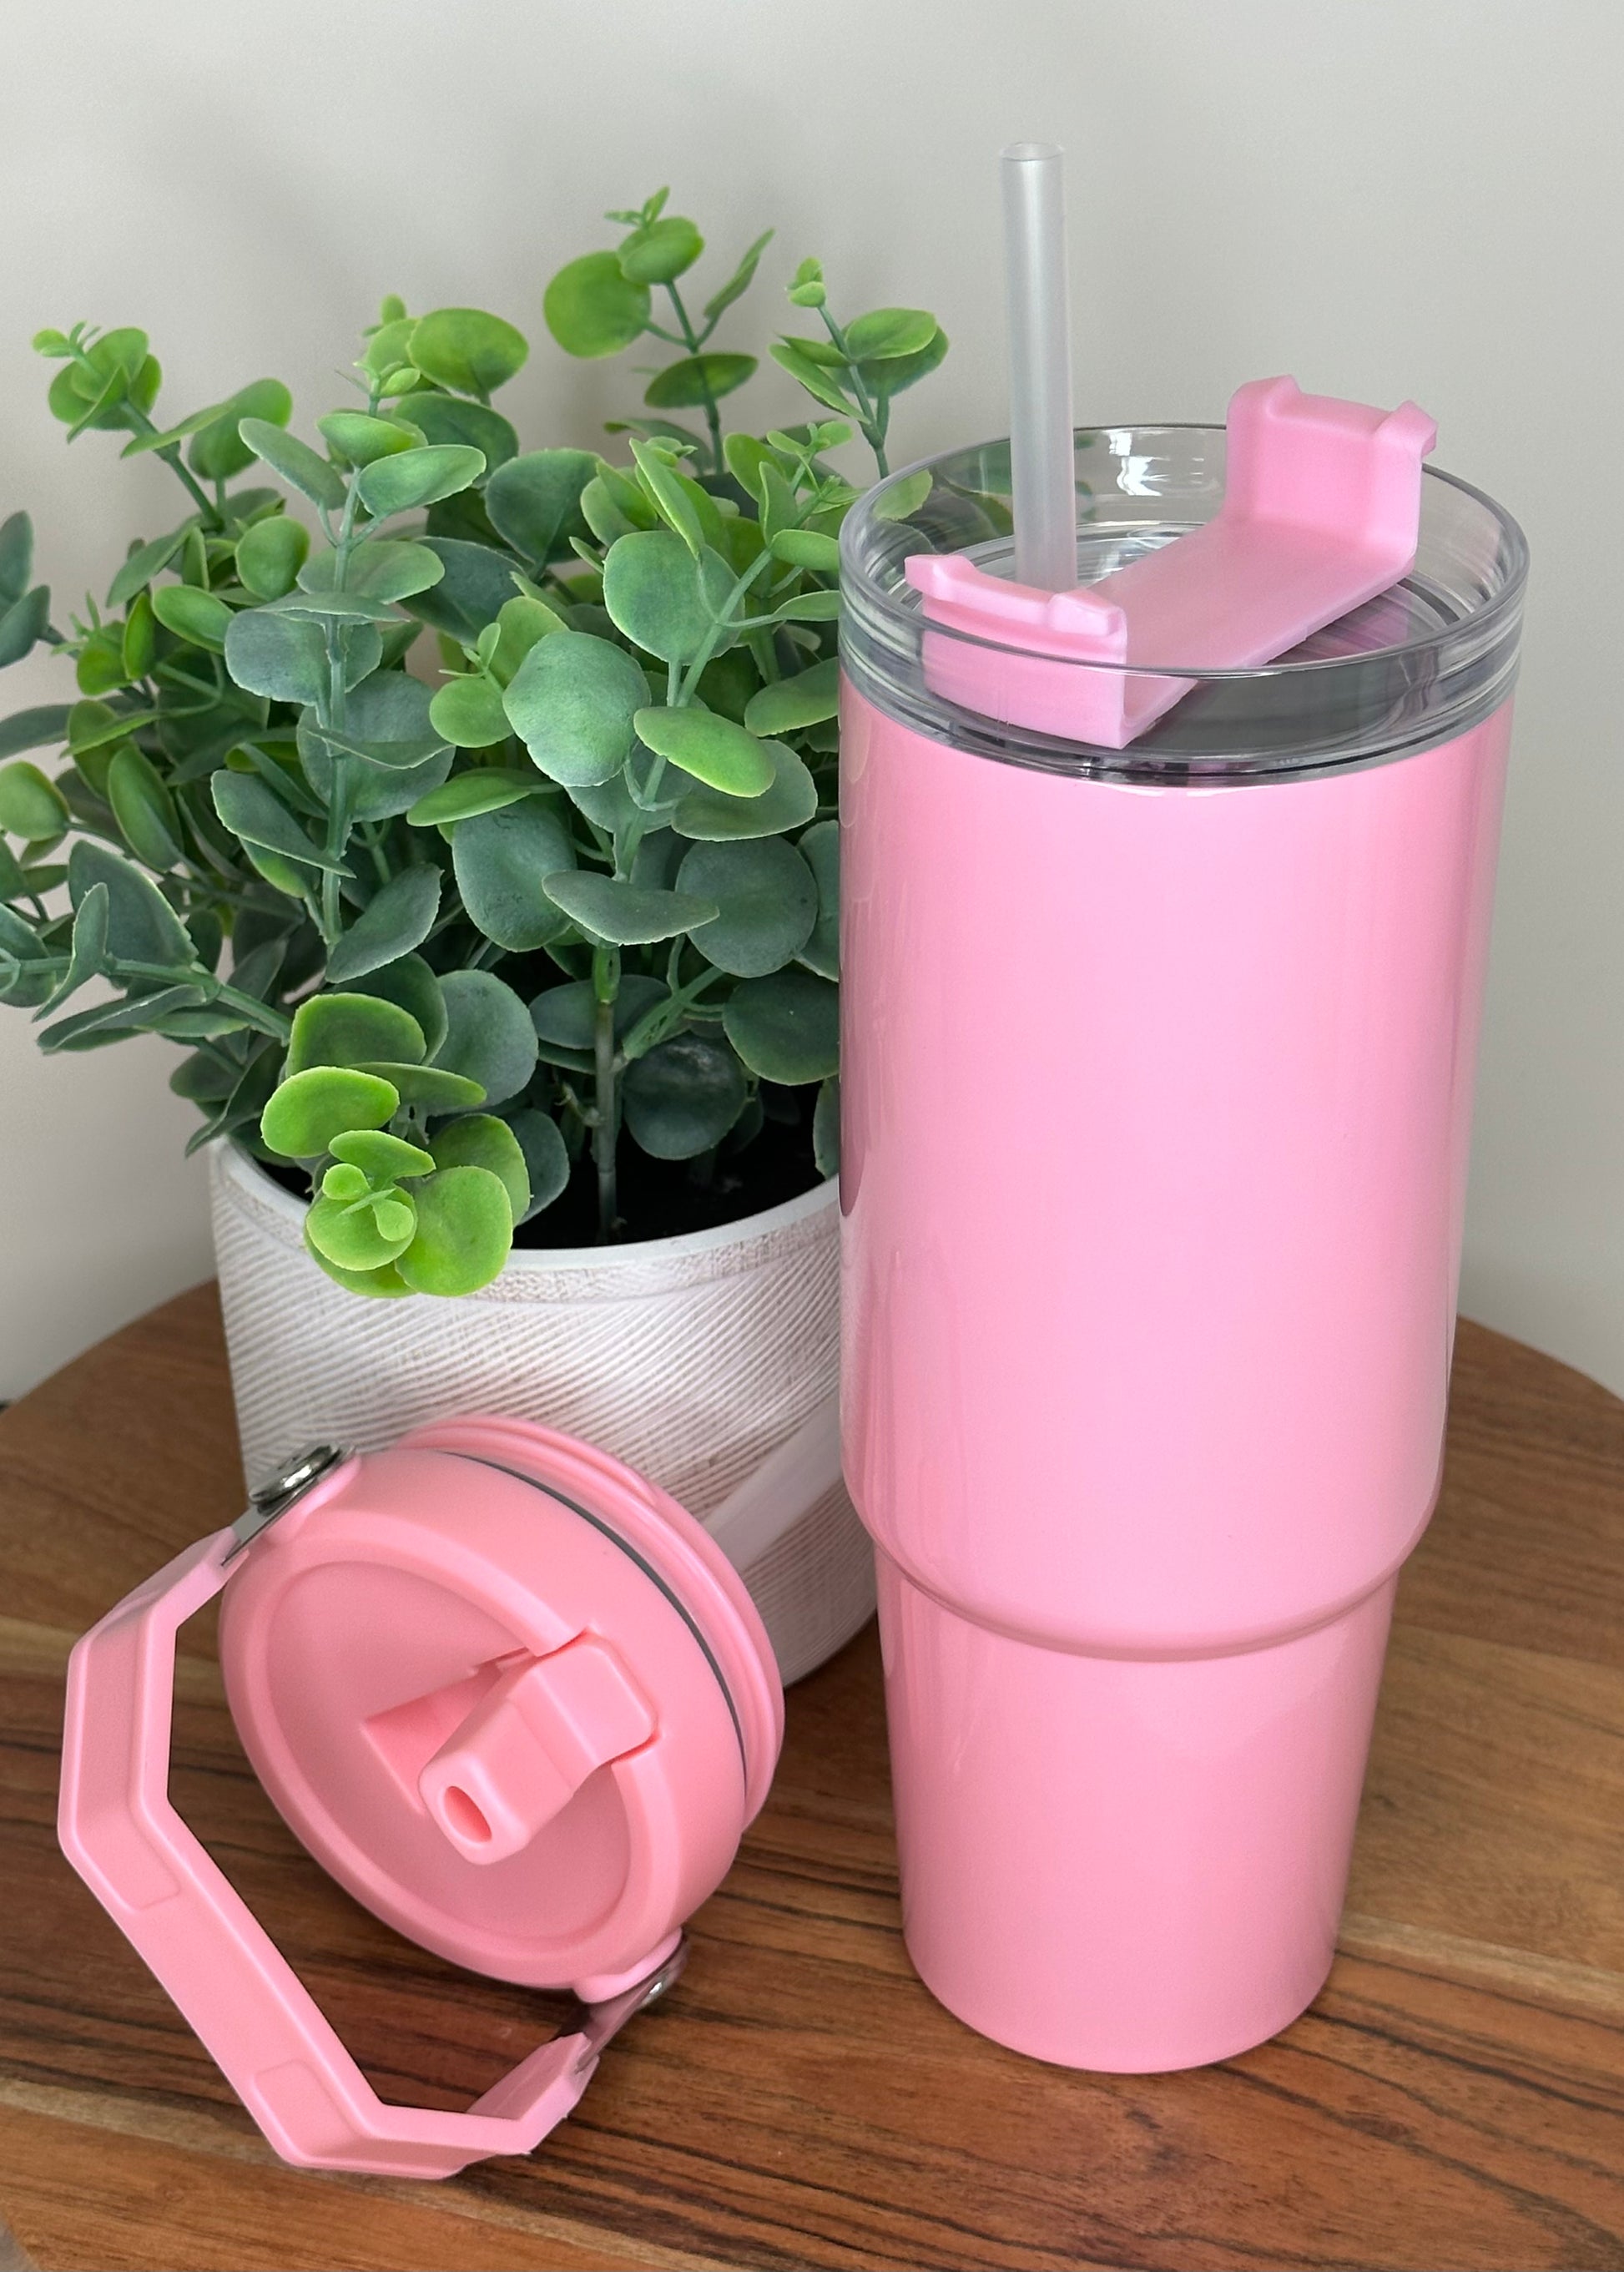  YOUEXPERT 30 oz Tumbler with Handle, Lavender stanly cup 30oz  Stainless Steel Insulated Tumblers with Lid and Straw, 30 oz Travel Cup  Sports Tumblers - Barbi pink : Home & Kitchen